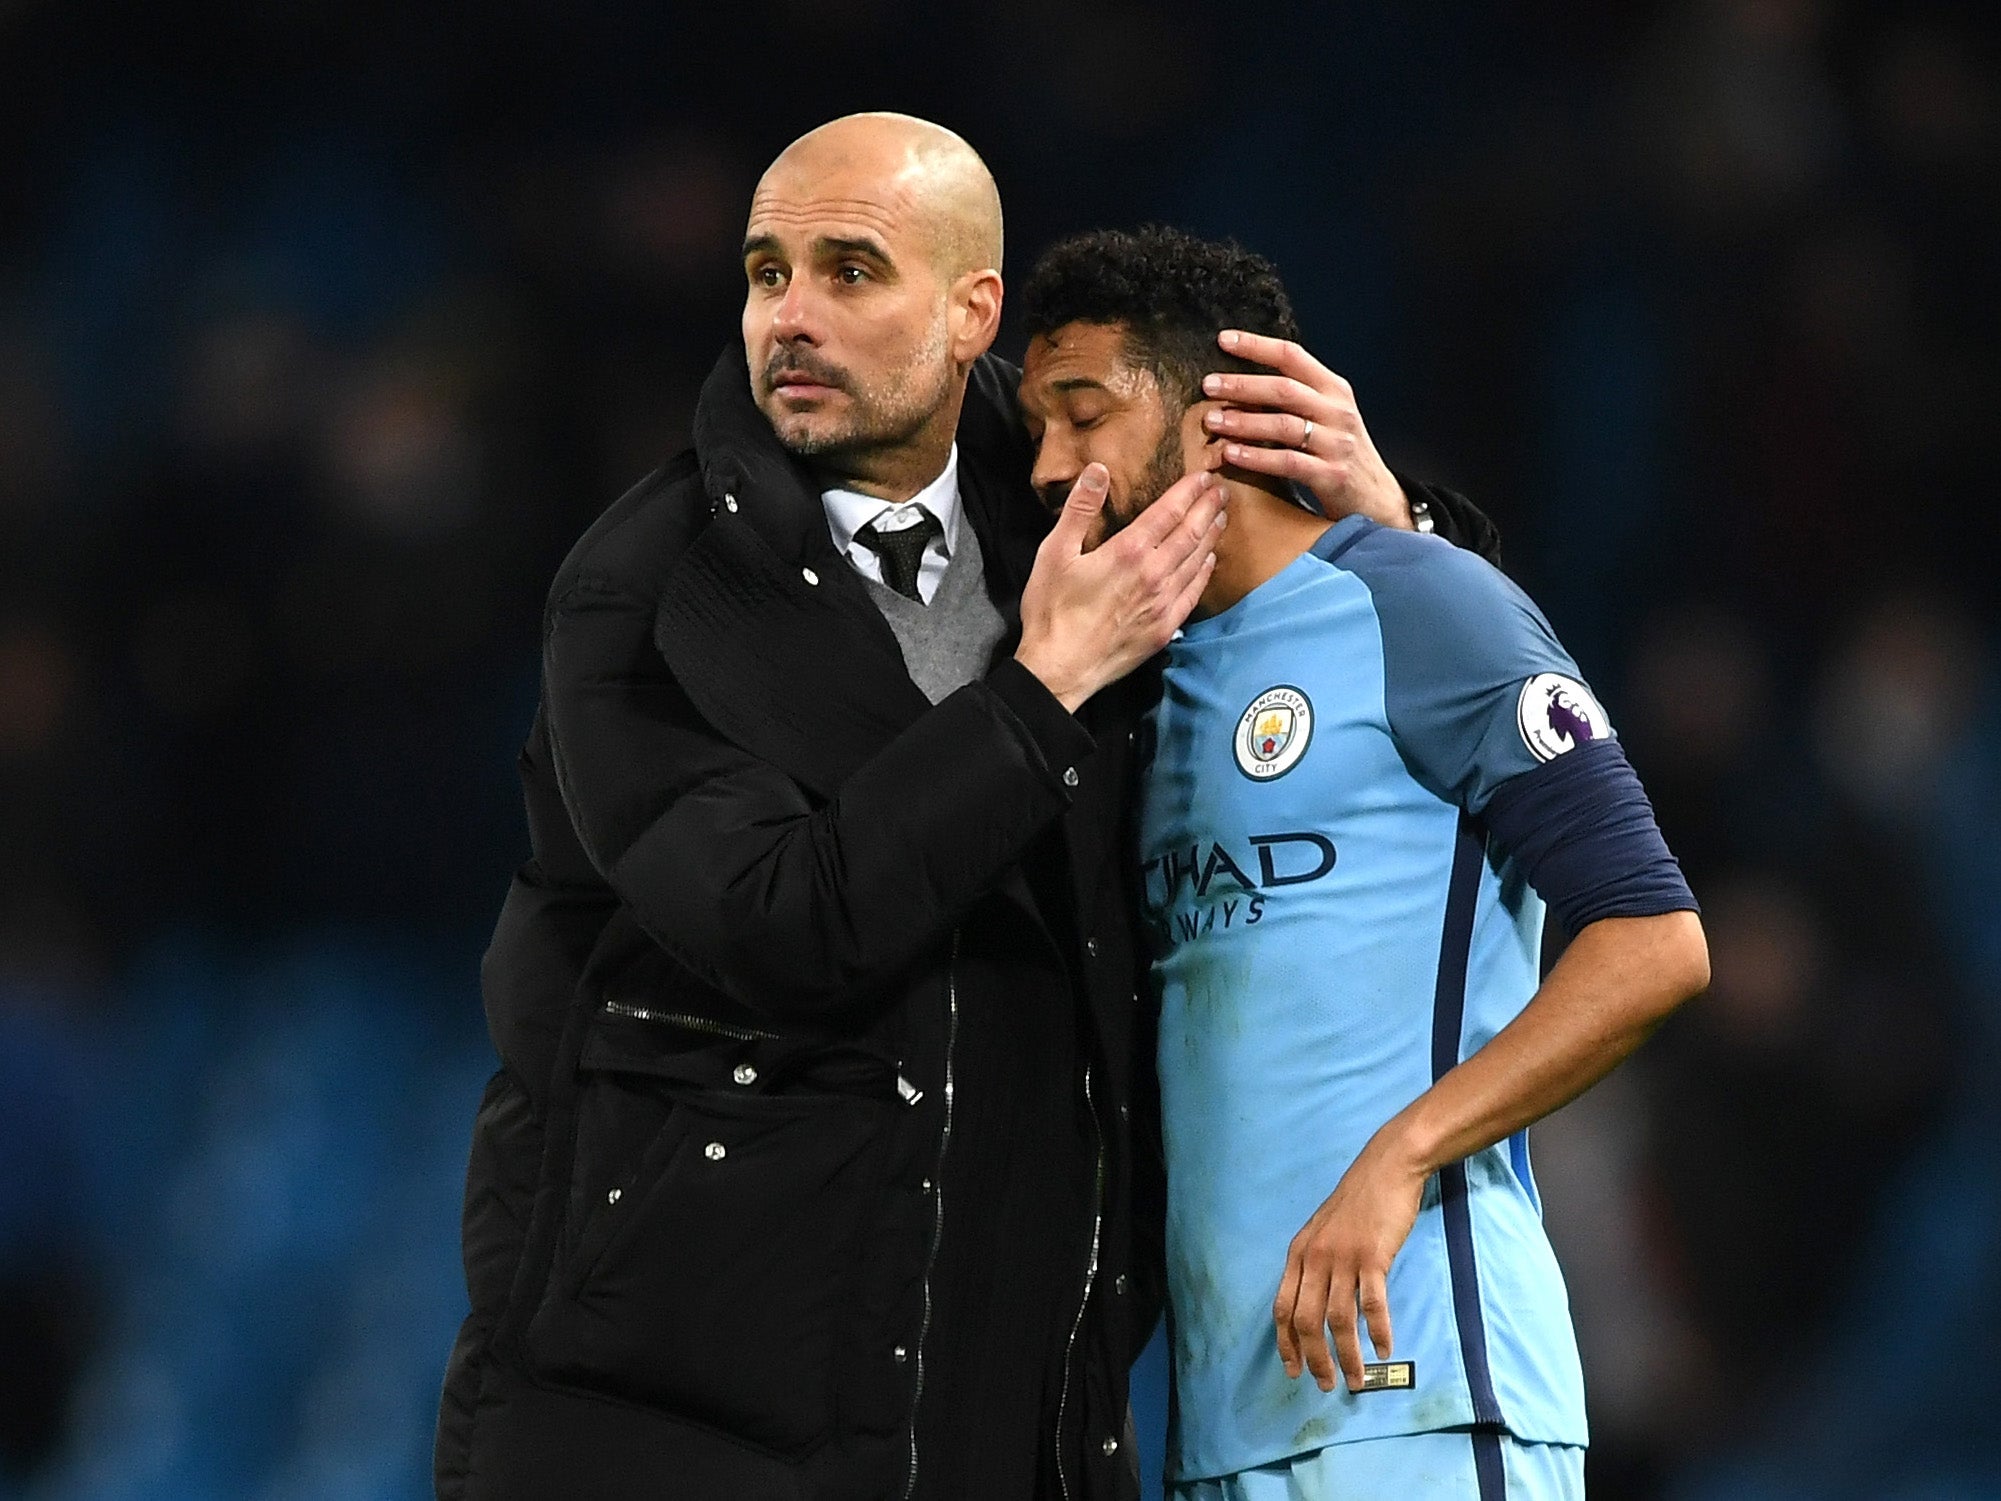 Clichy could leave City in the summer